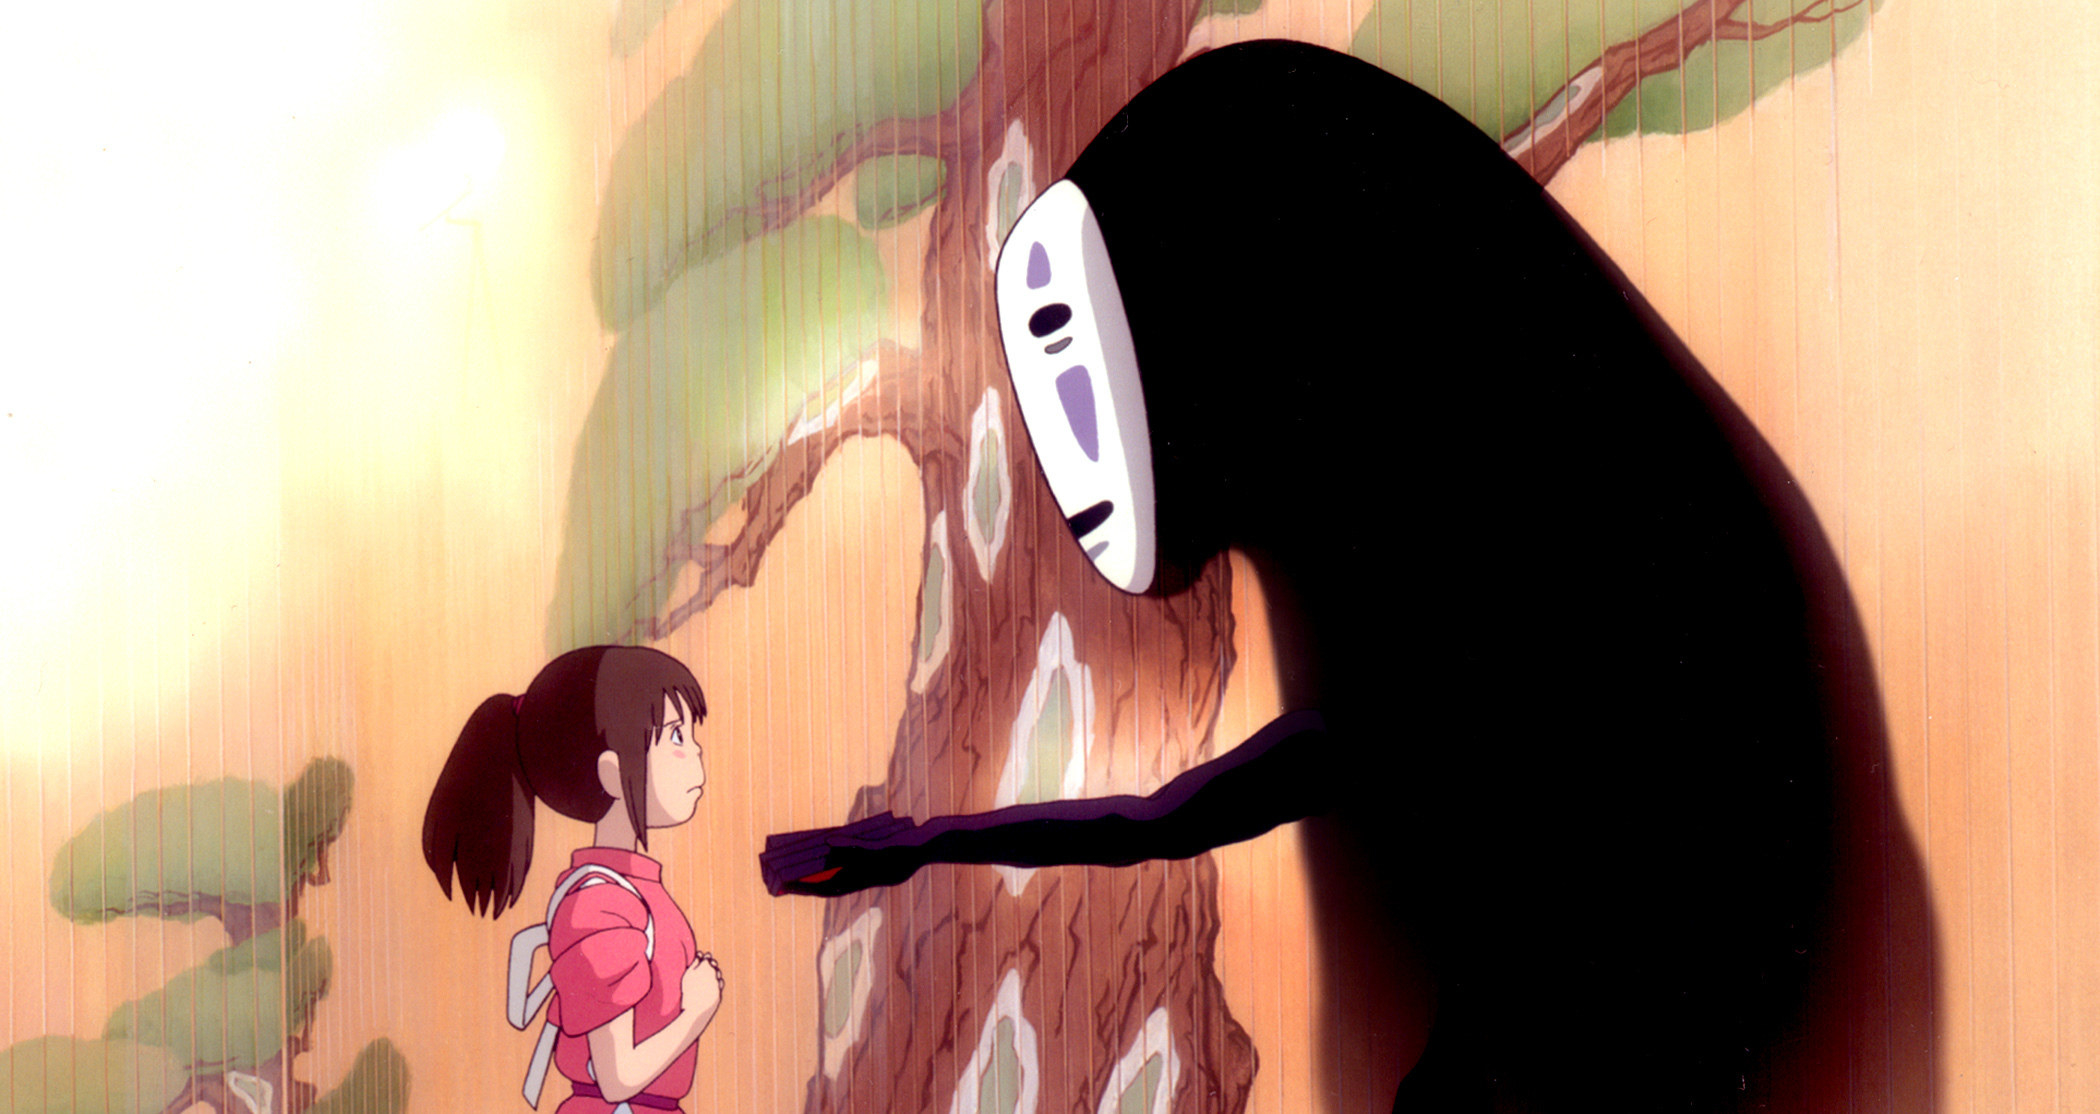 Chichiro with the shadowy masked creature No Face